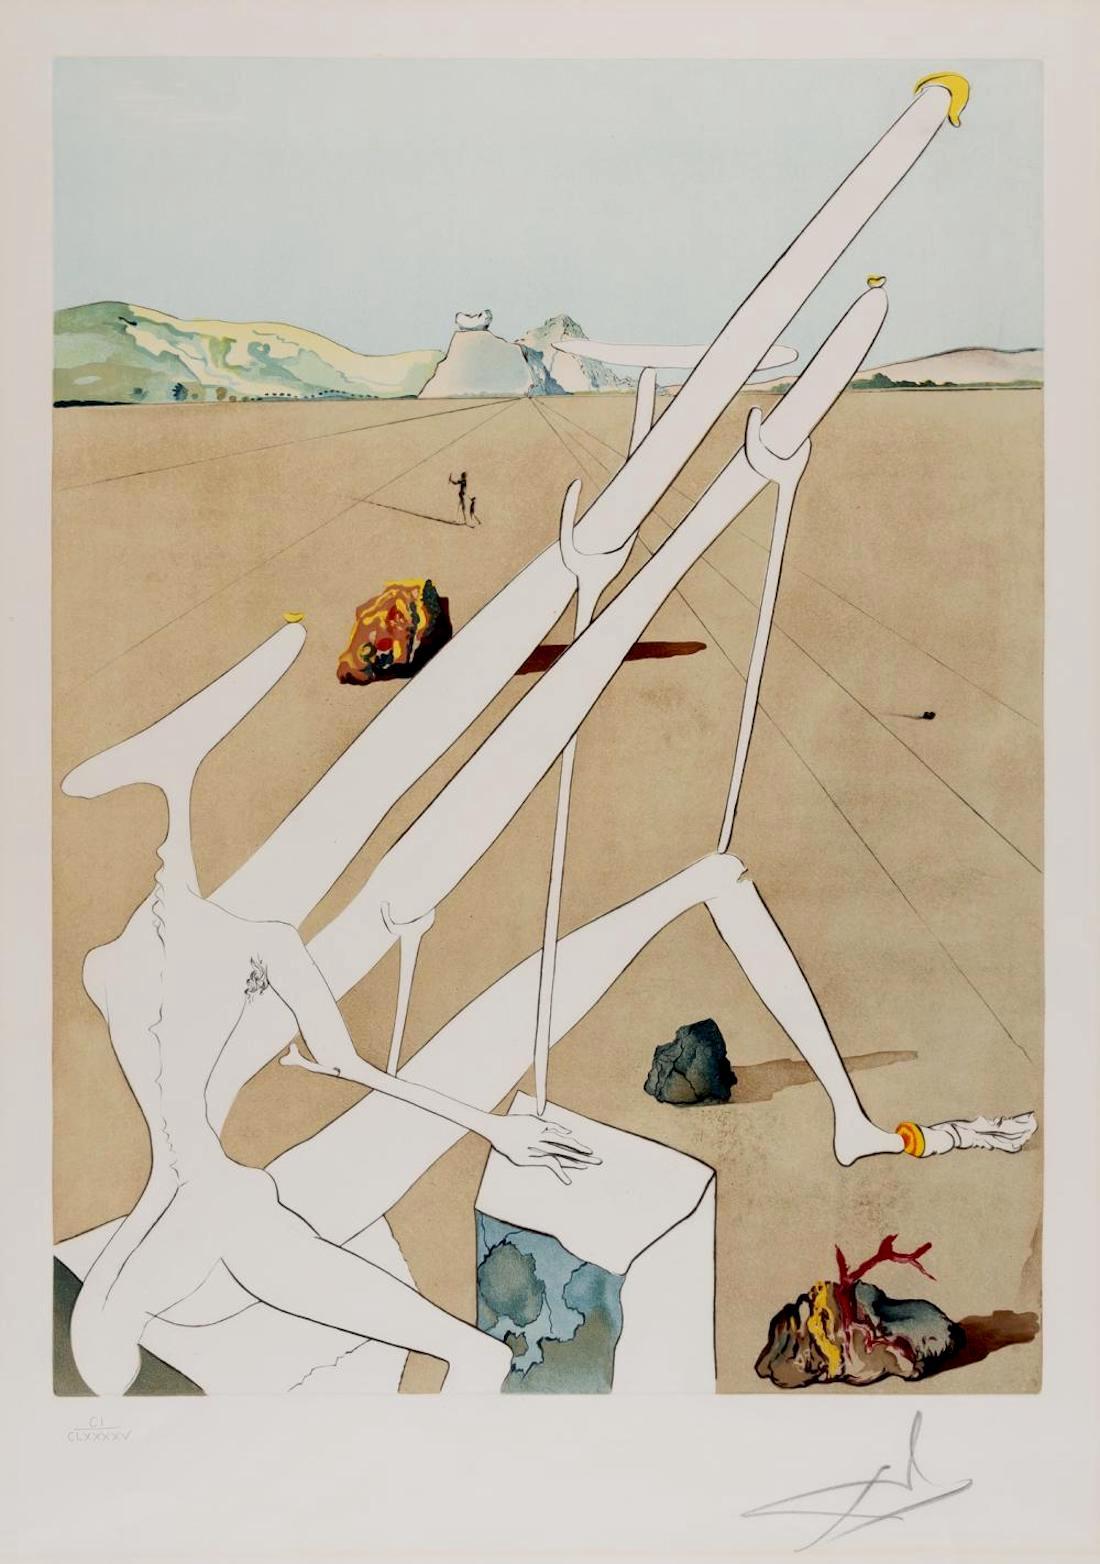 ARTIST: Salvador Dali

TITLE: Conquest of Cosmos 1 Suite

 MEDIUM: 6 color Etchings & Aquatints with embossing

SIGNED: Each piece is Hand Signed 

PUBLISHER: Levine & Levine 

EDITION NUMBER: CI/CLXXXXV matched numbered

MEASUREMENTS: 38.5